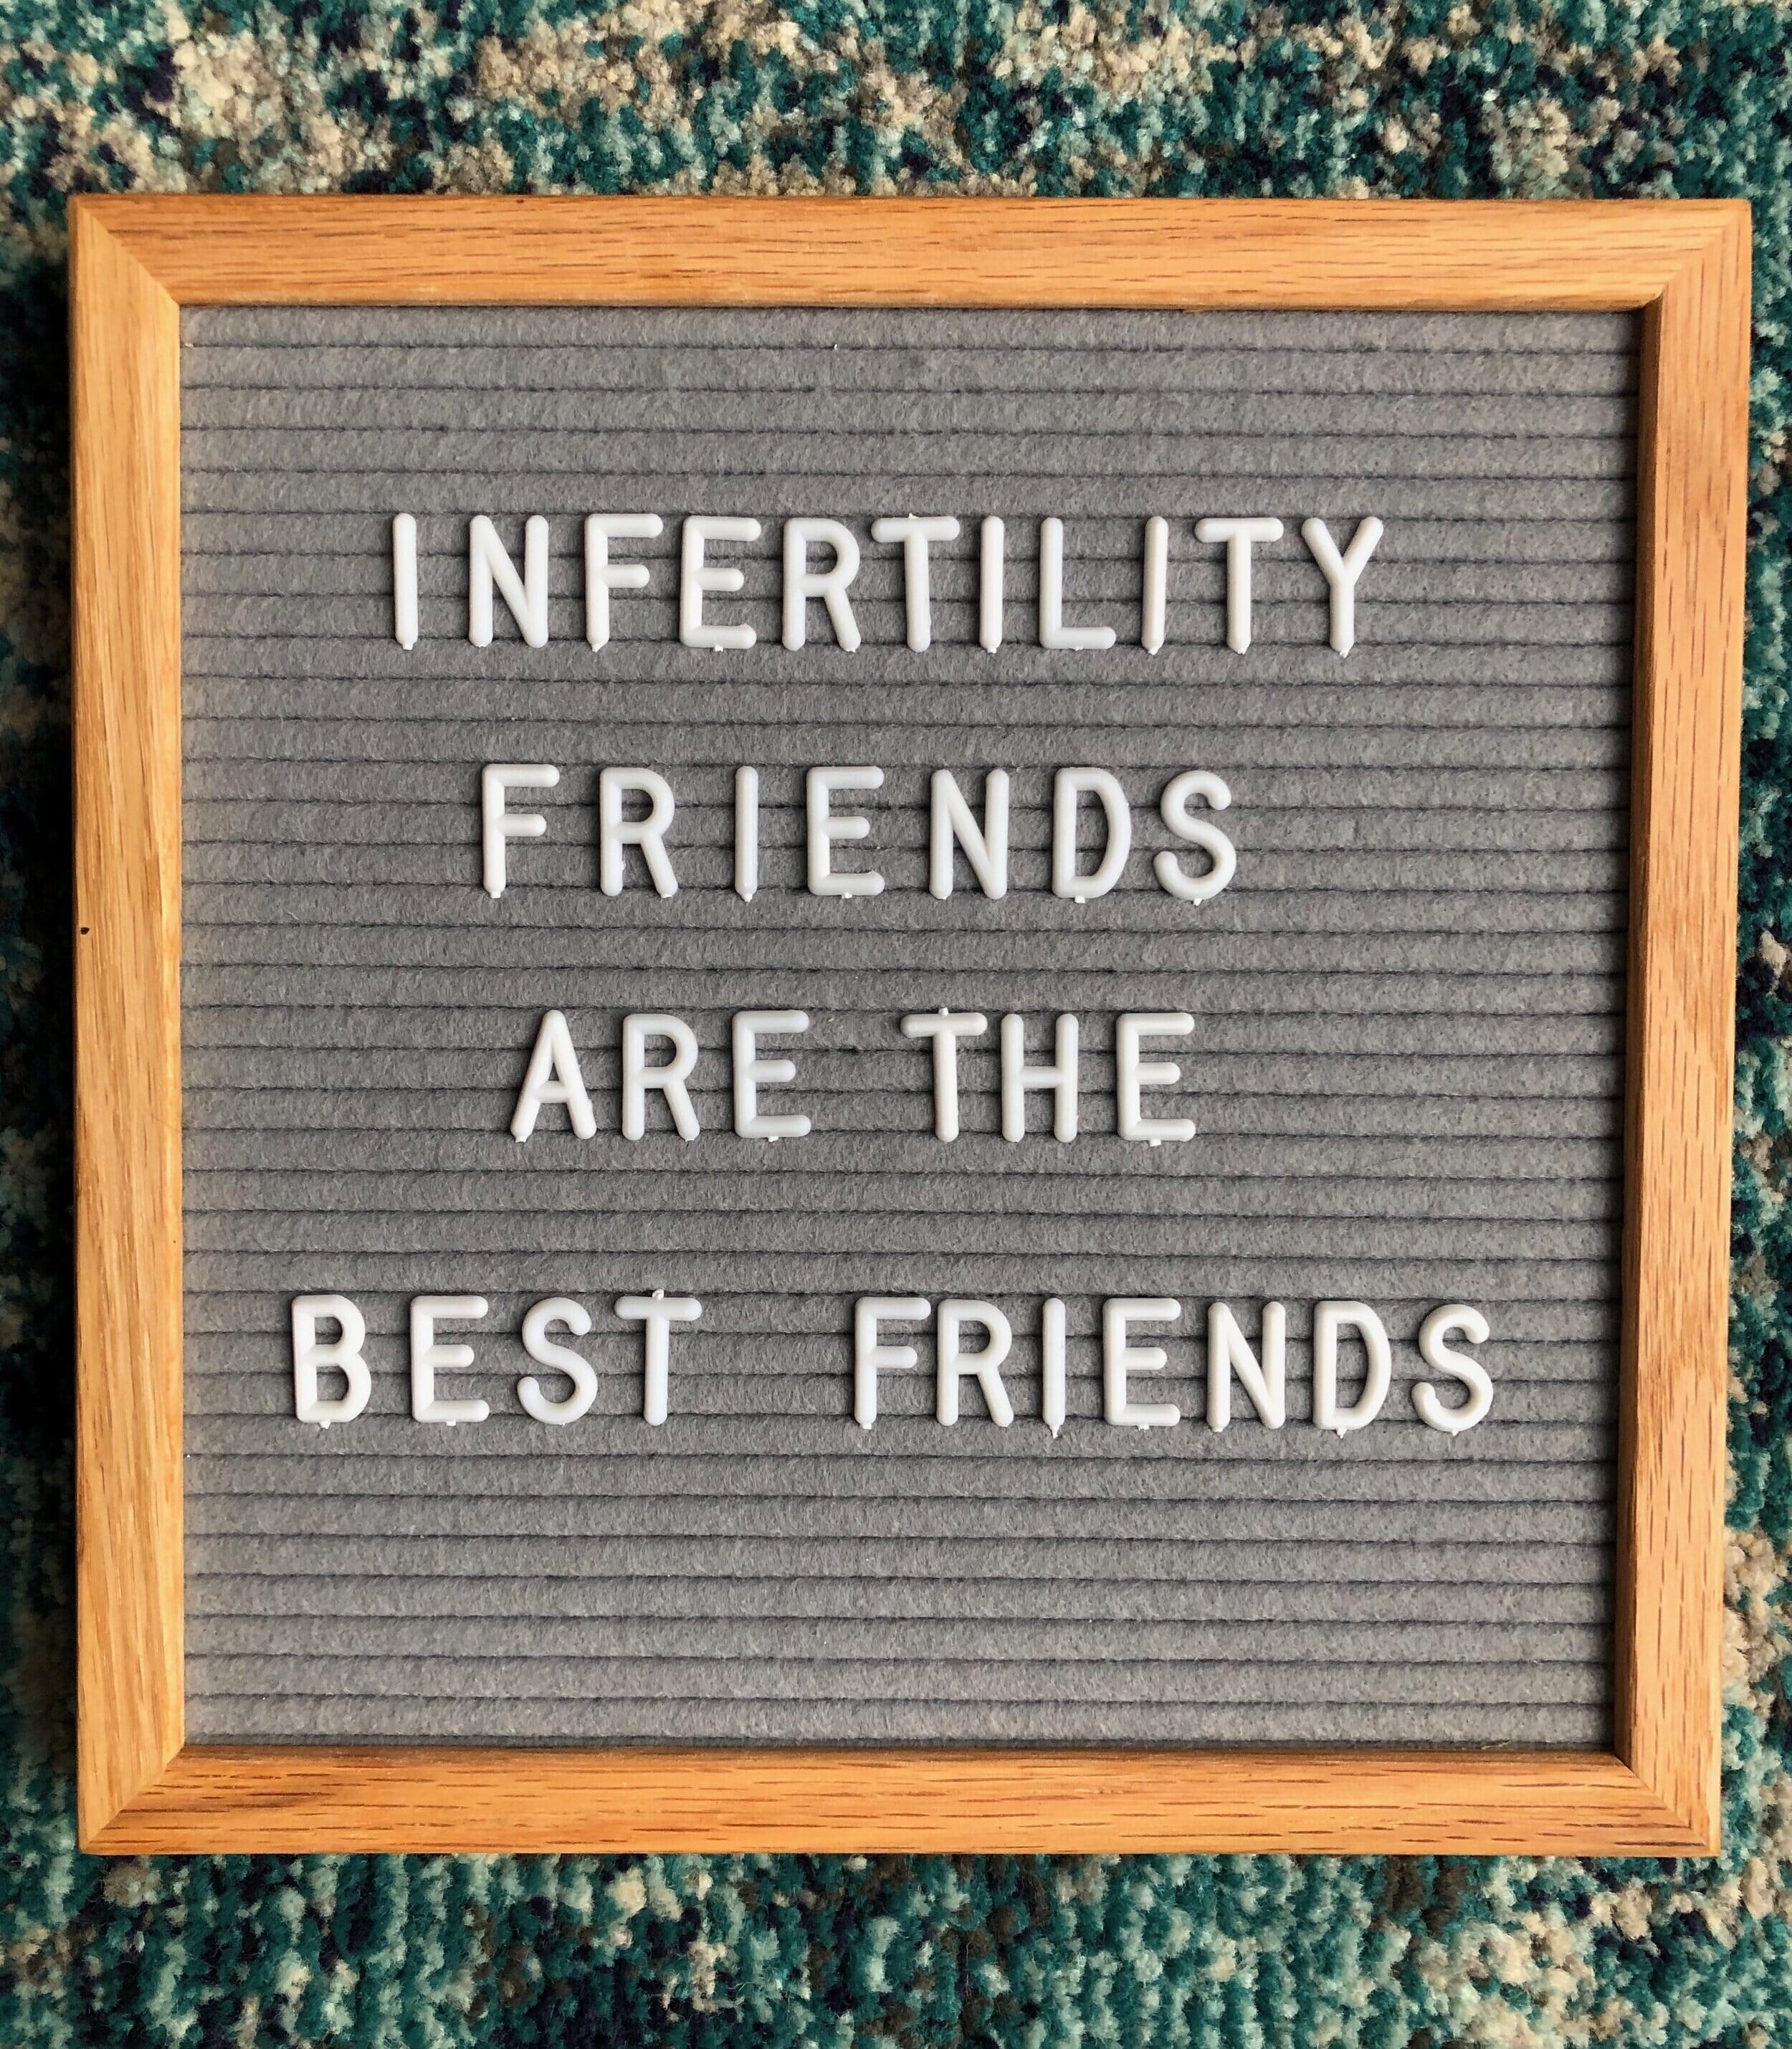 sign that reads "infertility friends are the best friends"